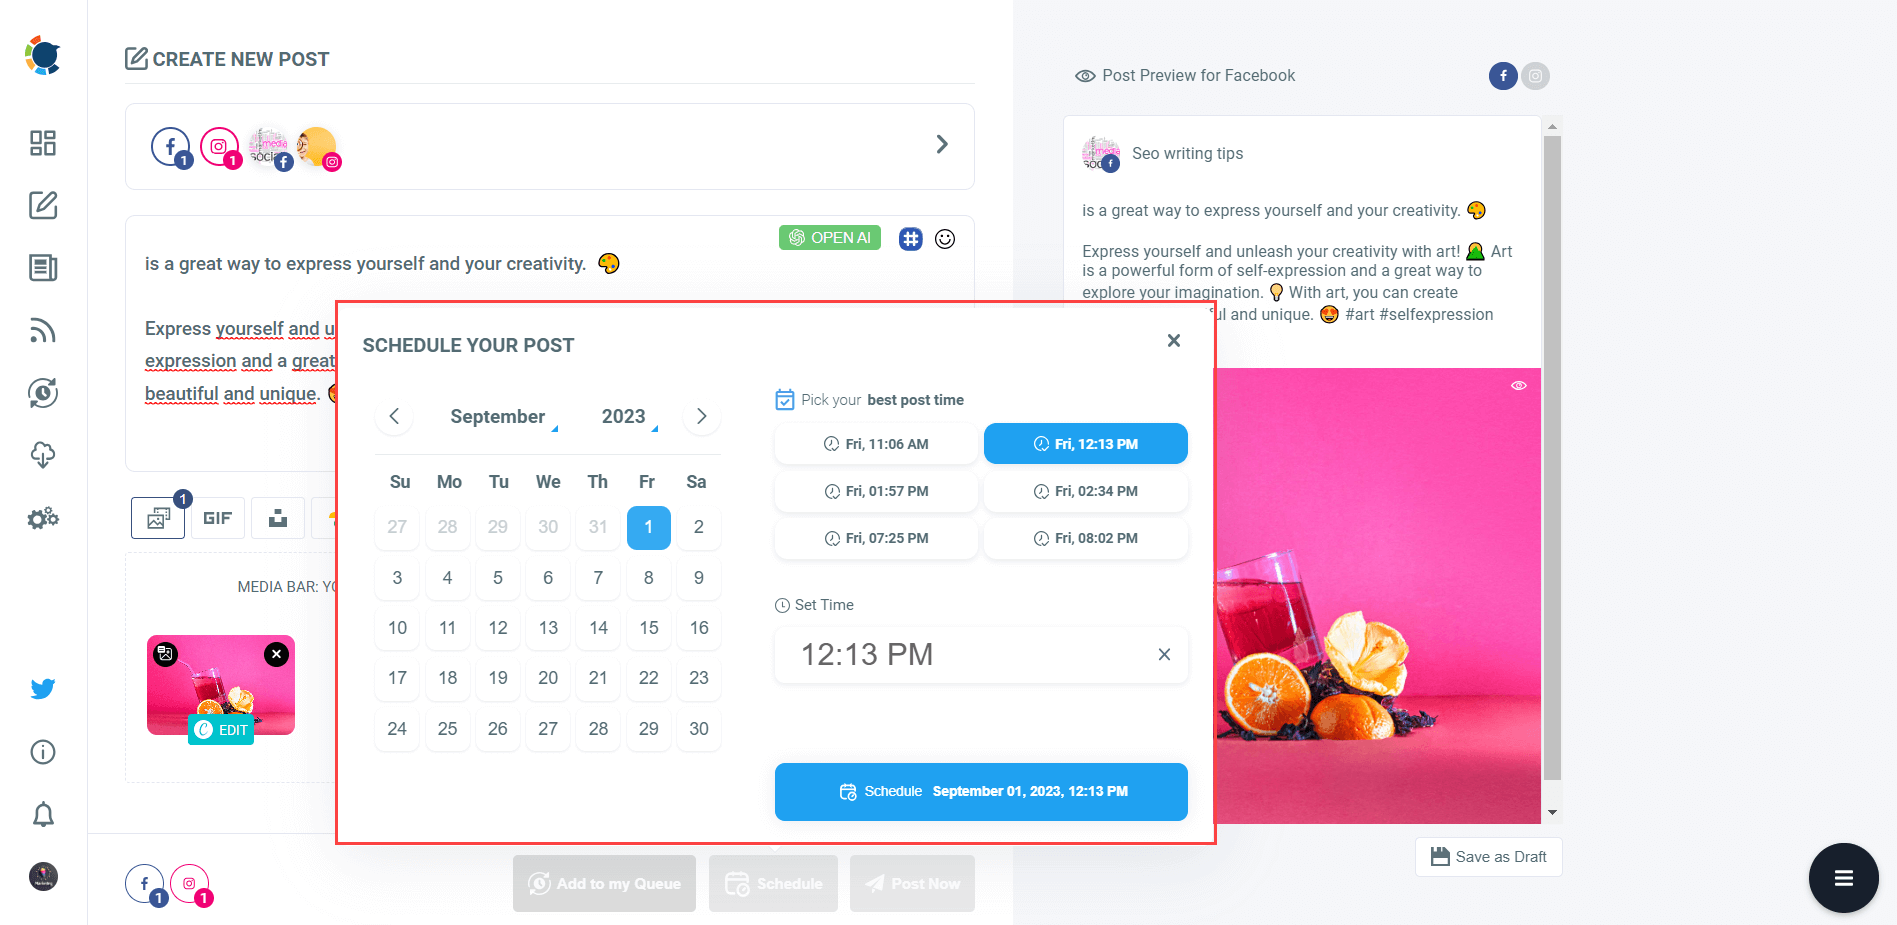 Schedule your Instagram for the best times